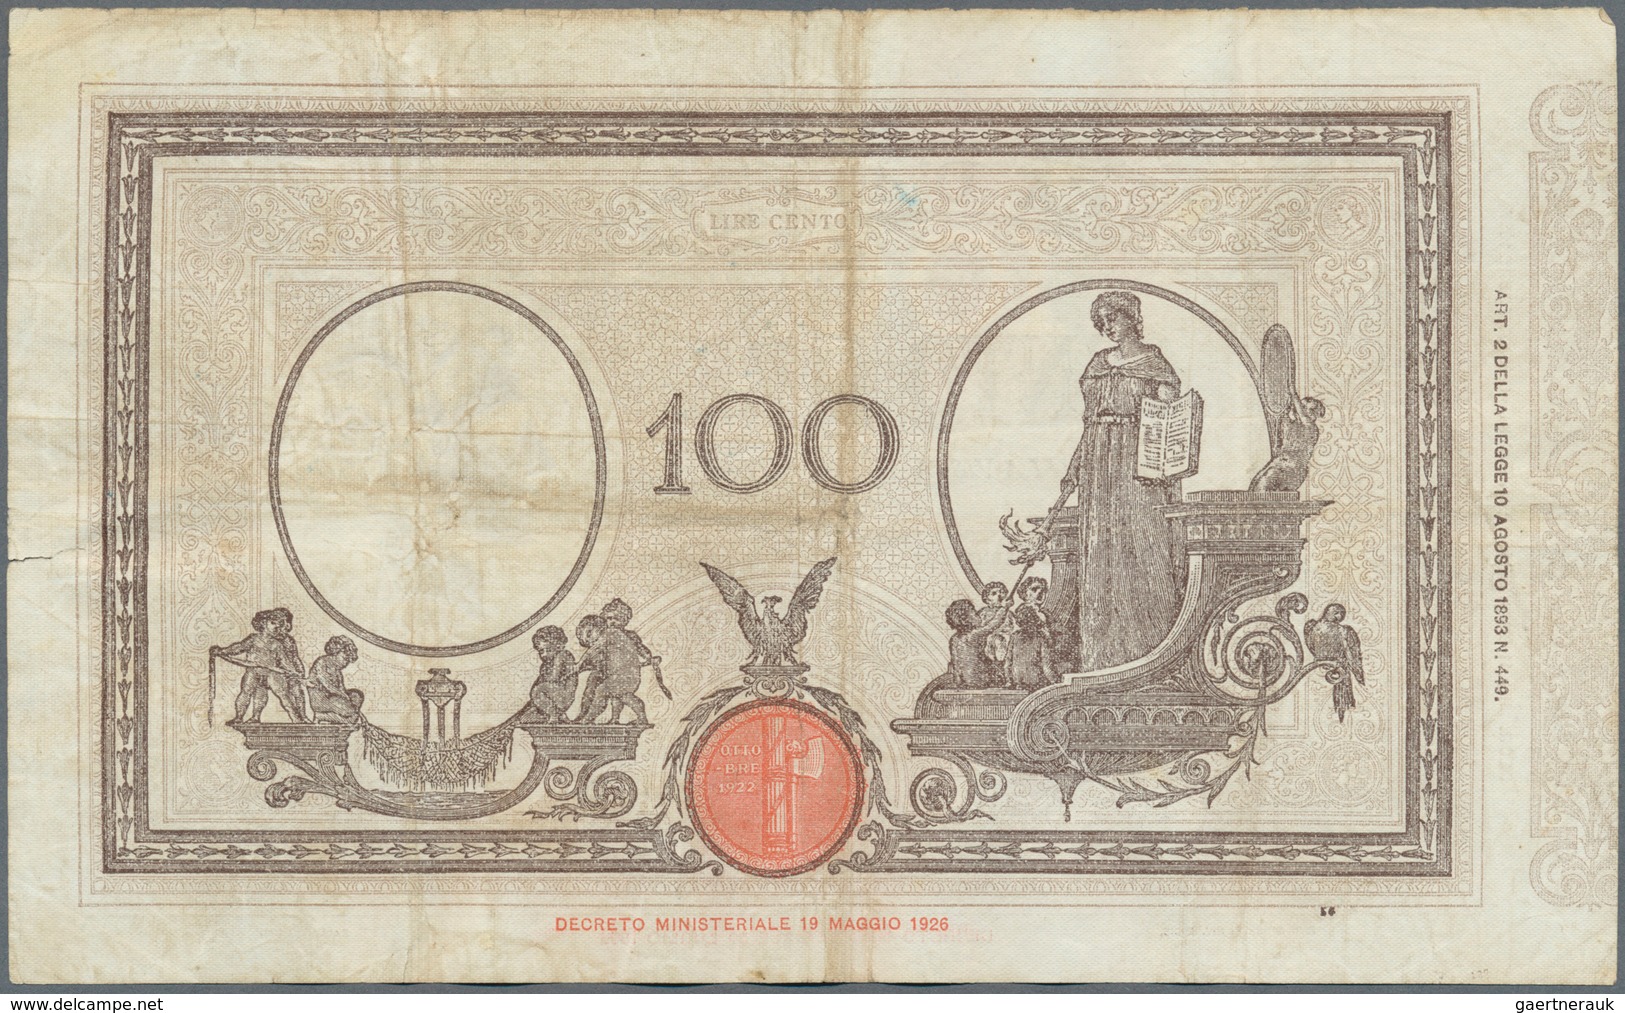 Italy / Italien: set of 5 notes containing 100 Lire 1927/29/30 P. 48, all used with light folds, pre